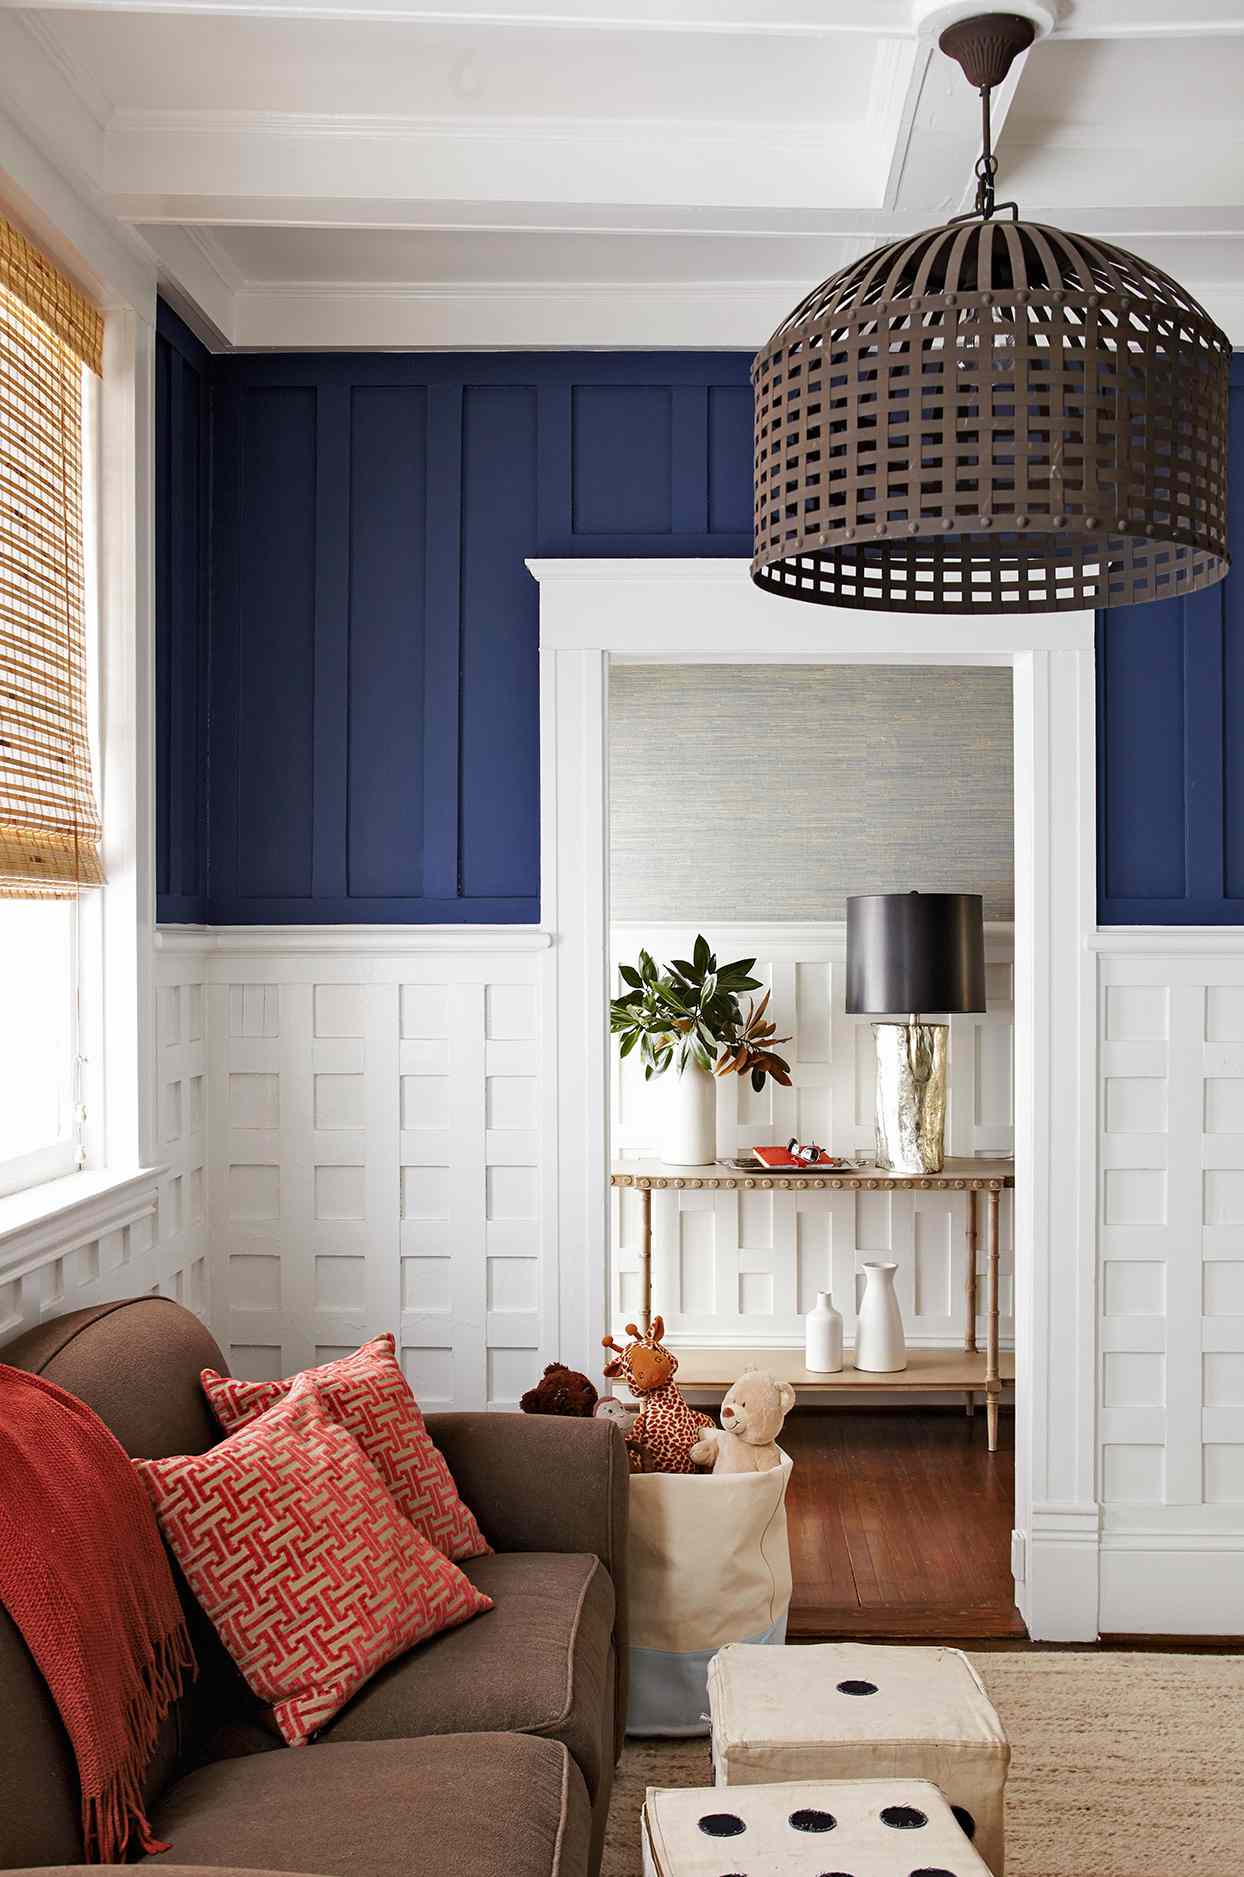 25 Living Room Color Schemes for a Cozy, Livable Space   Better ...